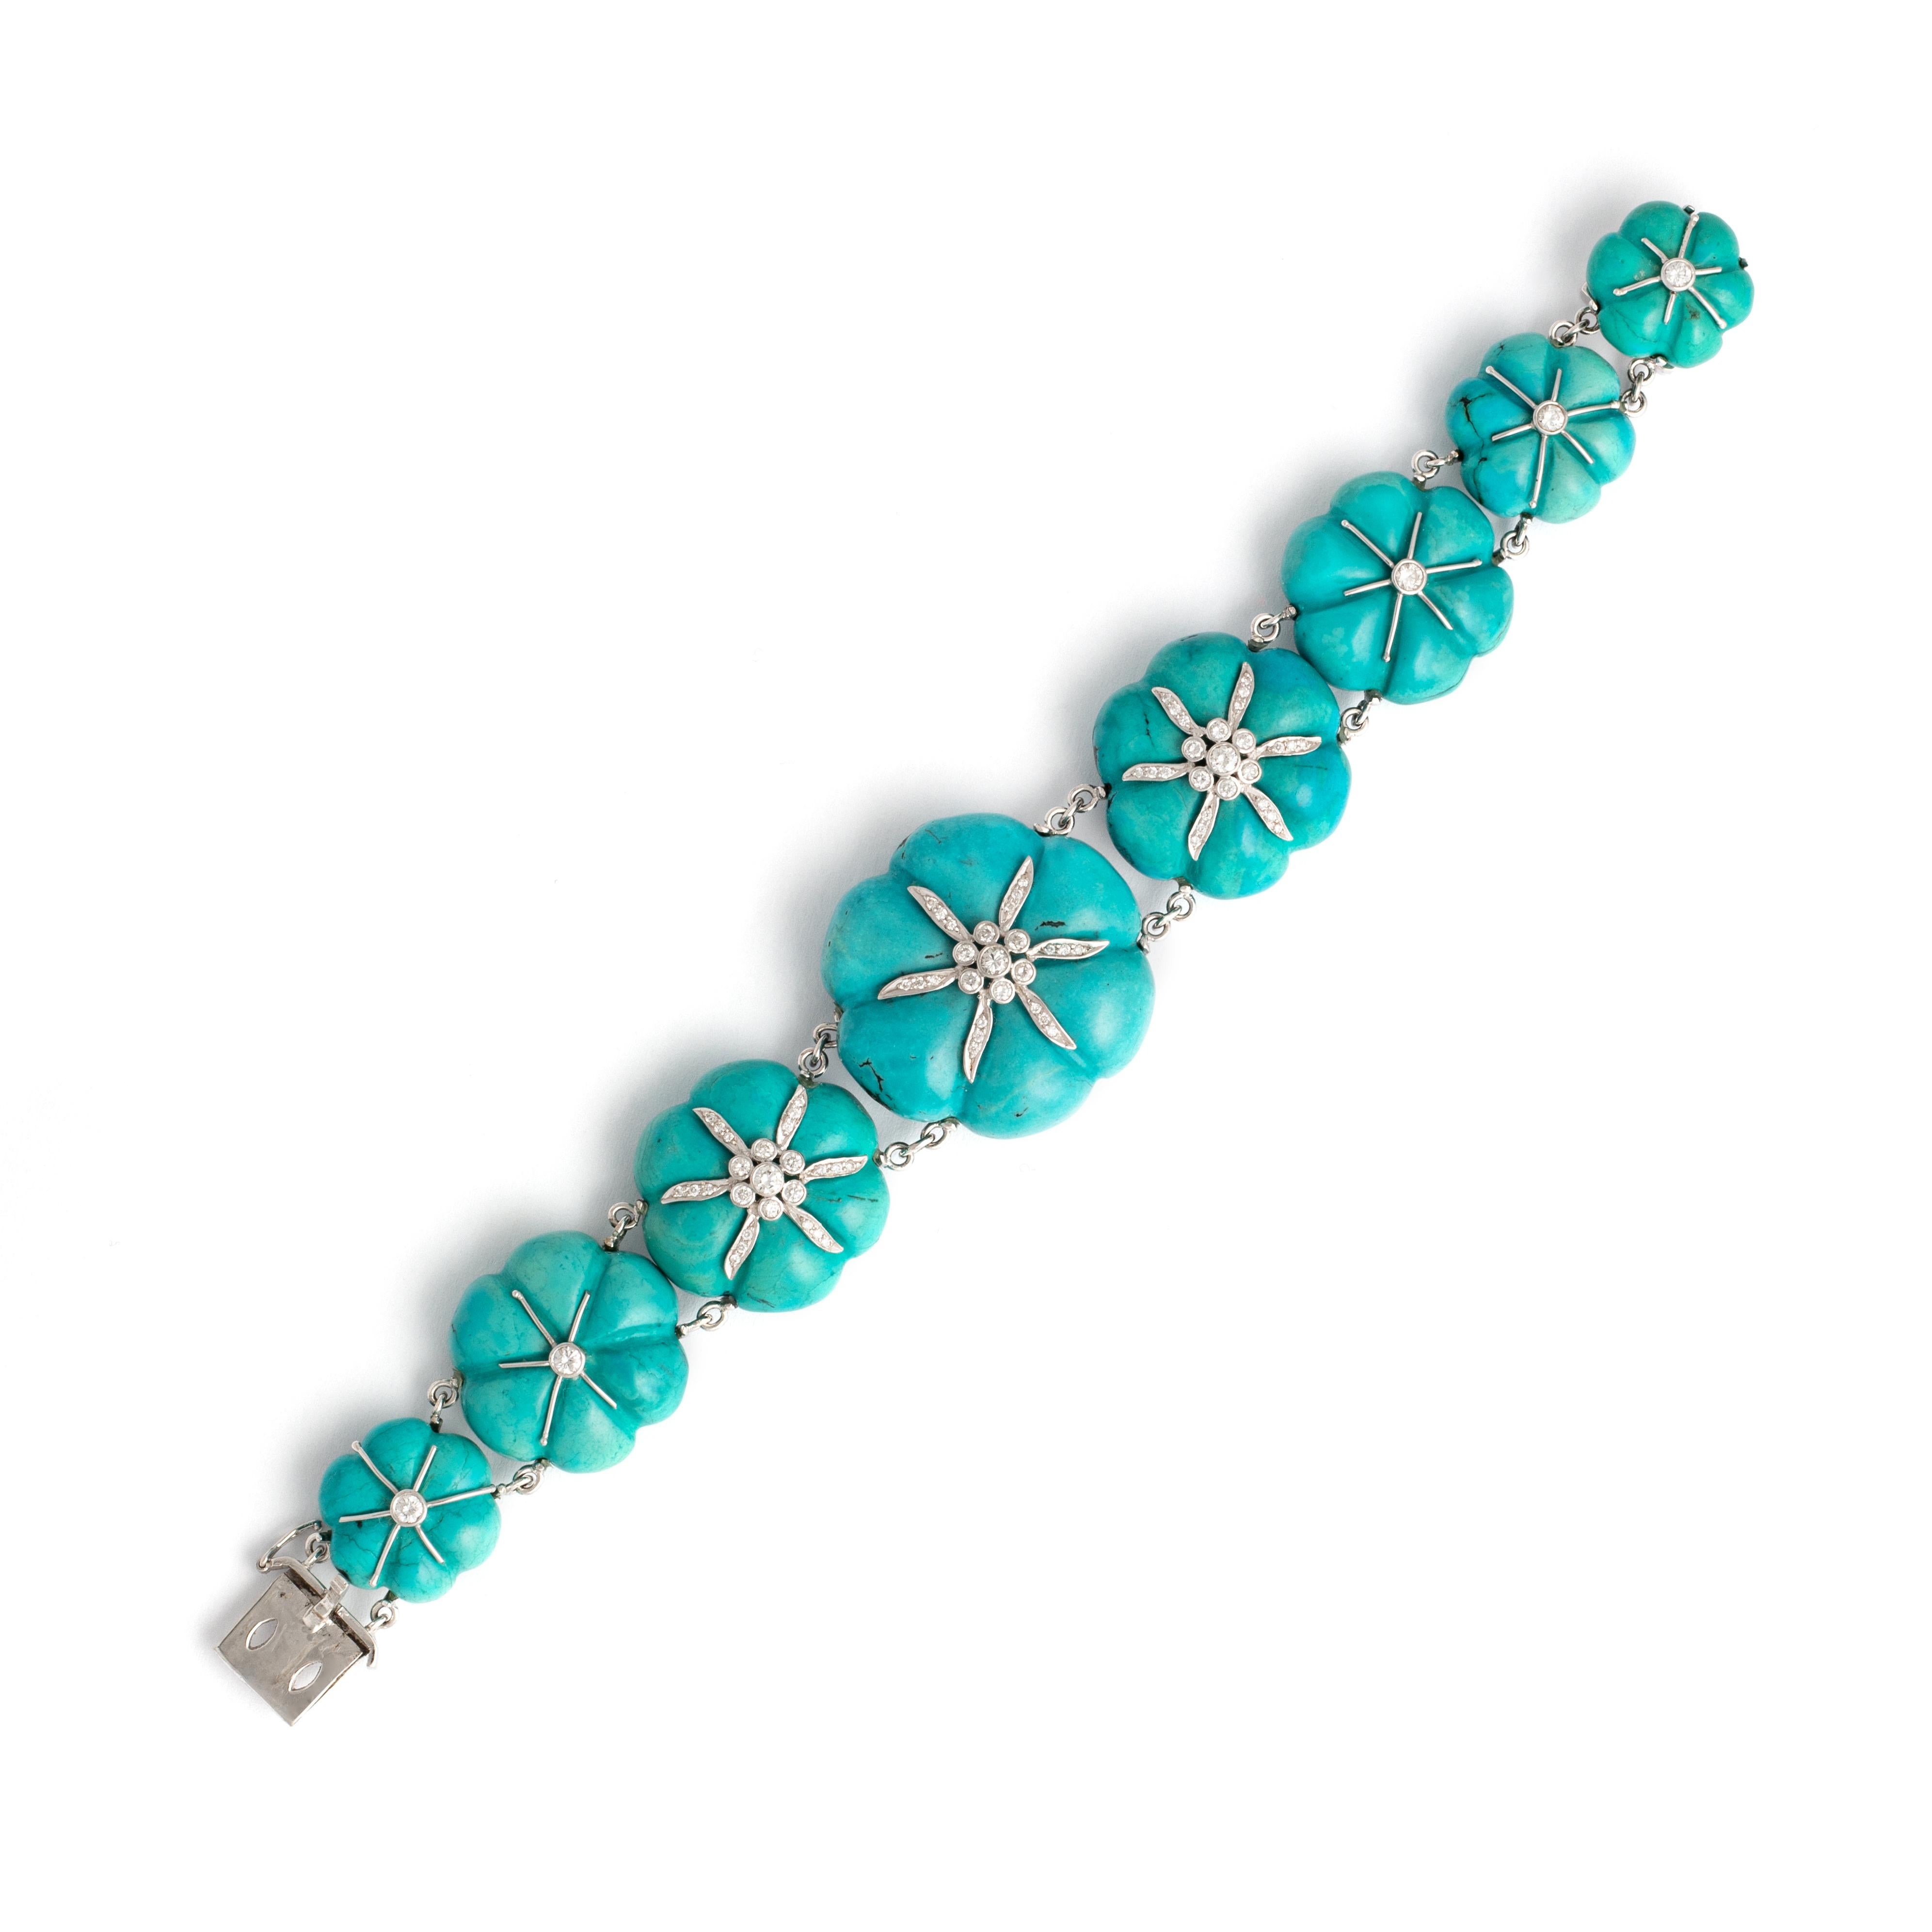 Natural Turquoise diamond and white gold bracelet.

Total length: approx. 18.70 centimeters.
Total height: approx. 1.30 centimeters up to 2.70 centimeters.

Total weight: 70.37 grams.